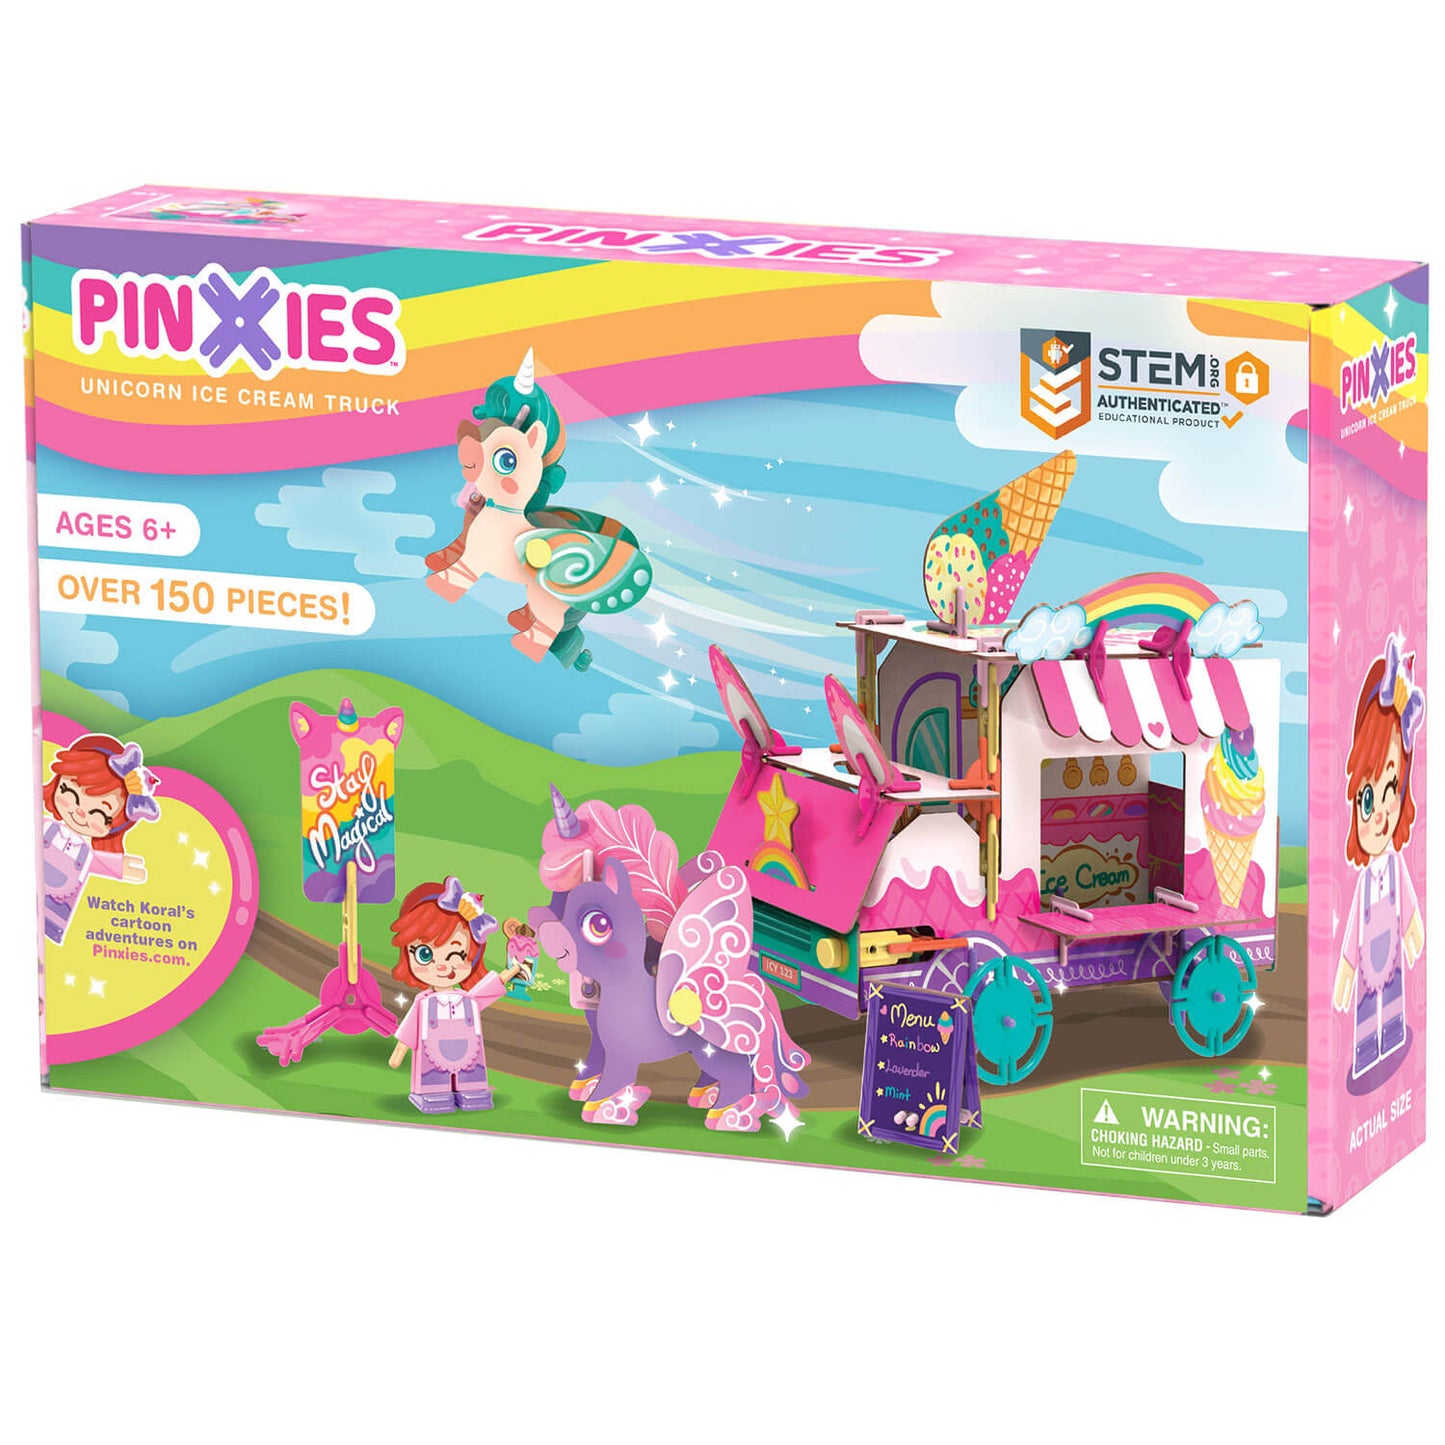 Pinxies Unicorn Ice Cream Truck is a STEM authenticated building set for ages 6+